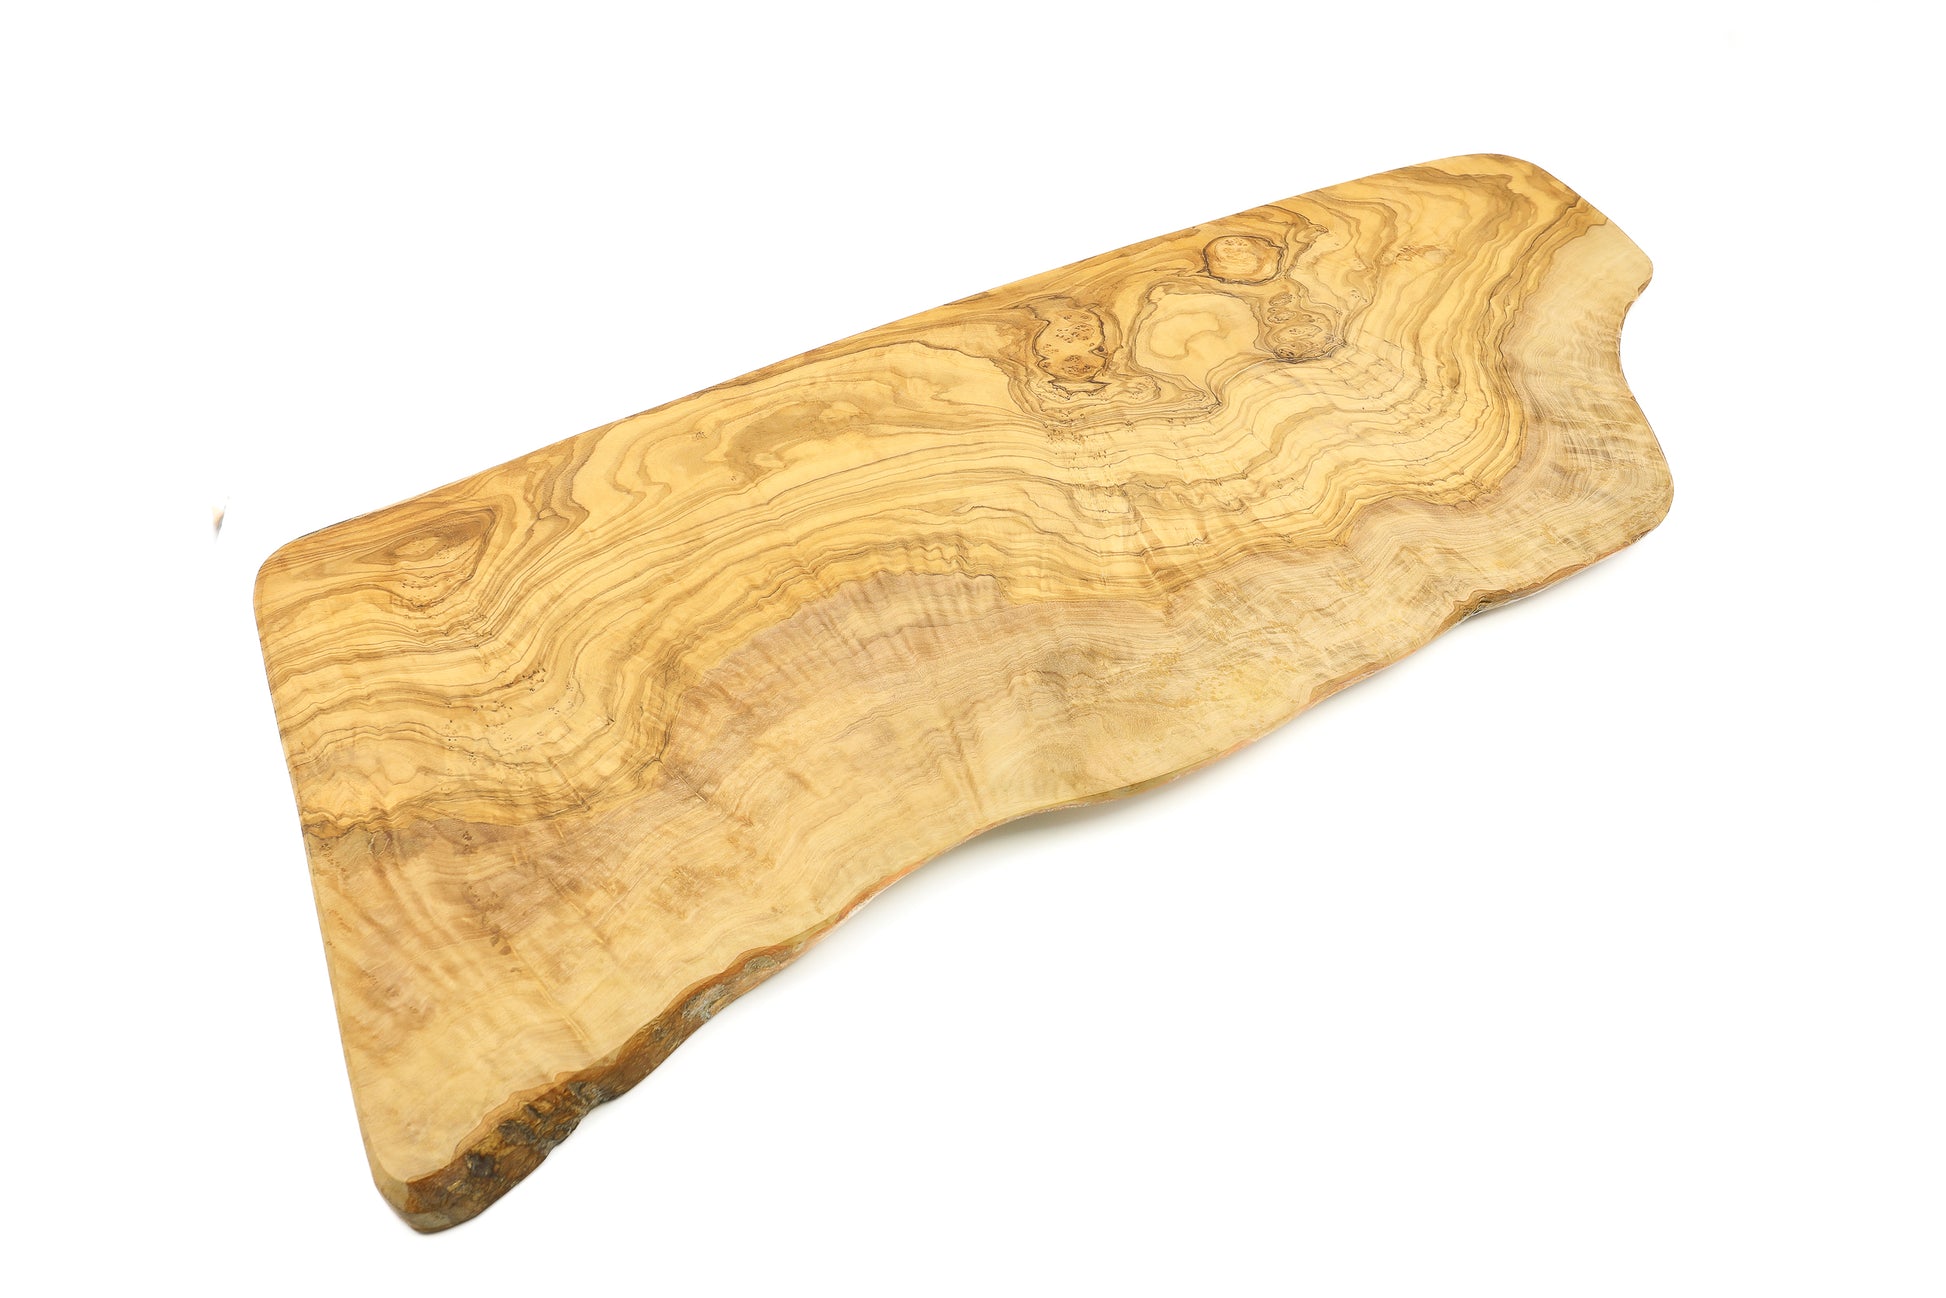 Handpicked Olive Wood Slabs for DIY and Woodworking: Olive Wood Cutting and Serving Board